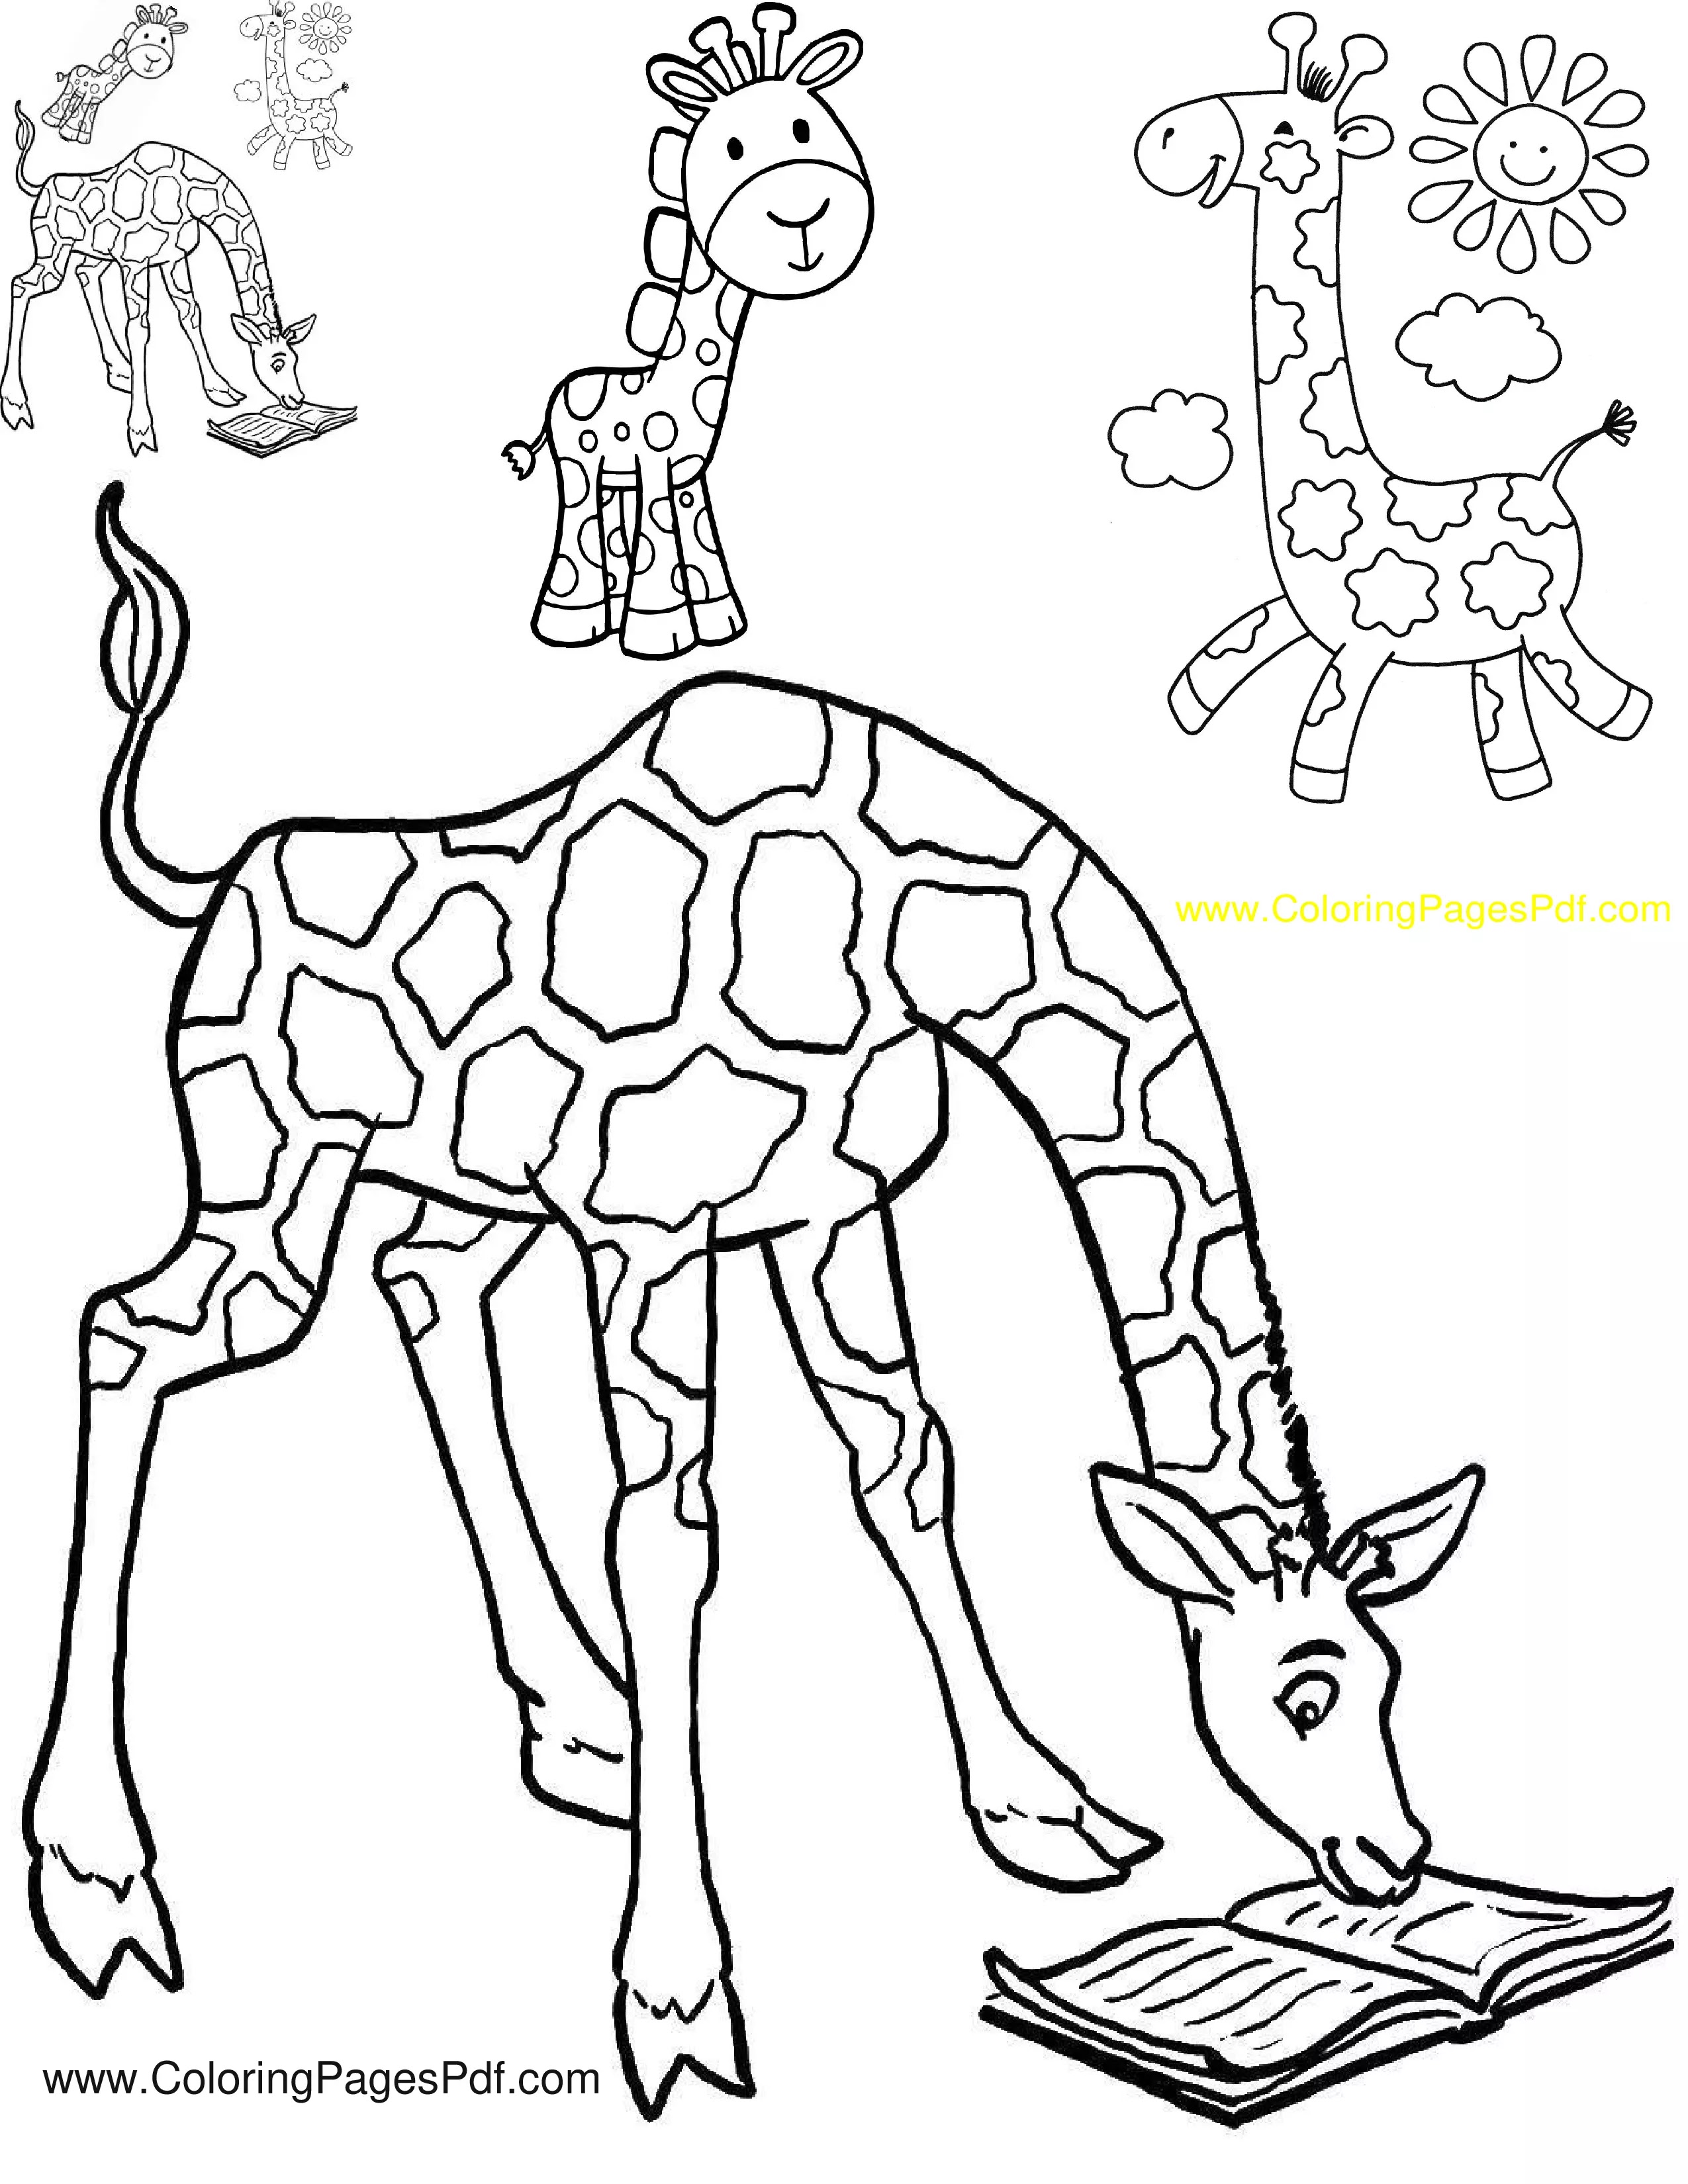 Giraffe coloring pages for kids